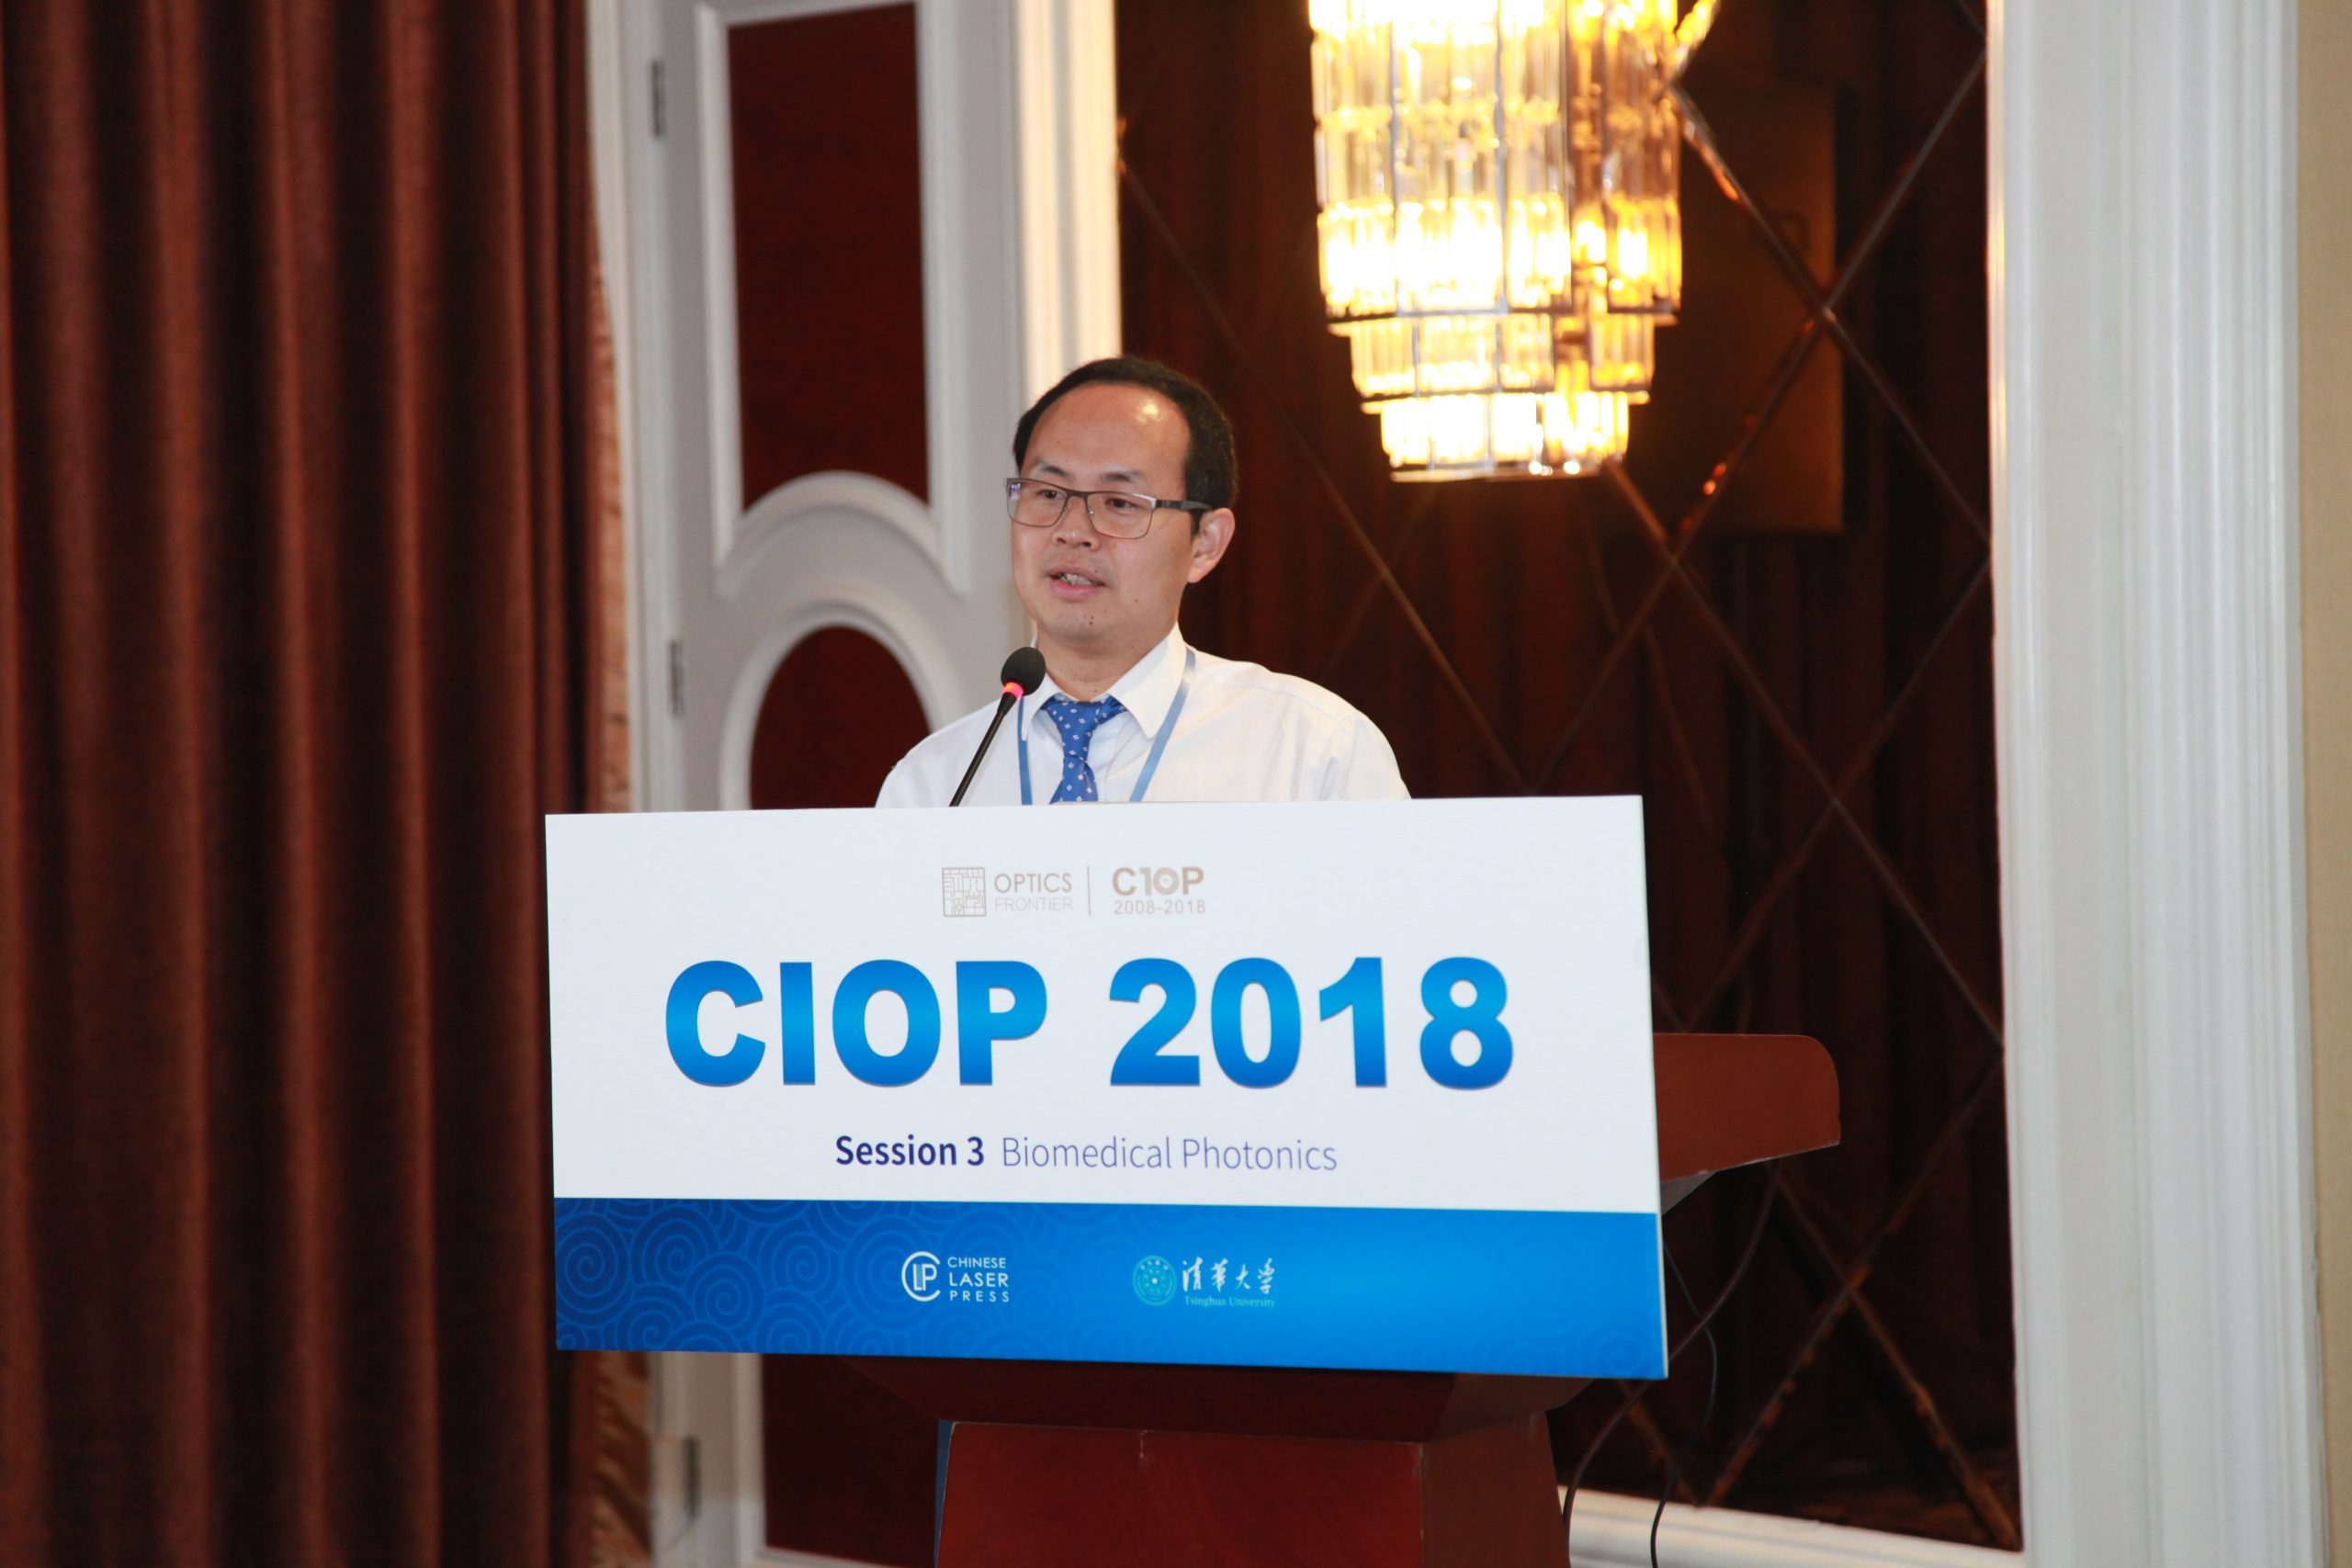 Dr. Liangzhong Xiang served as a Program Committee Member in CIOP 2018